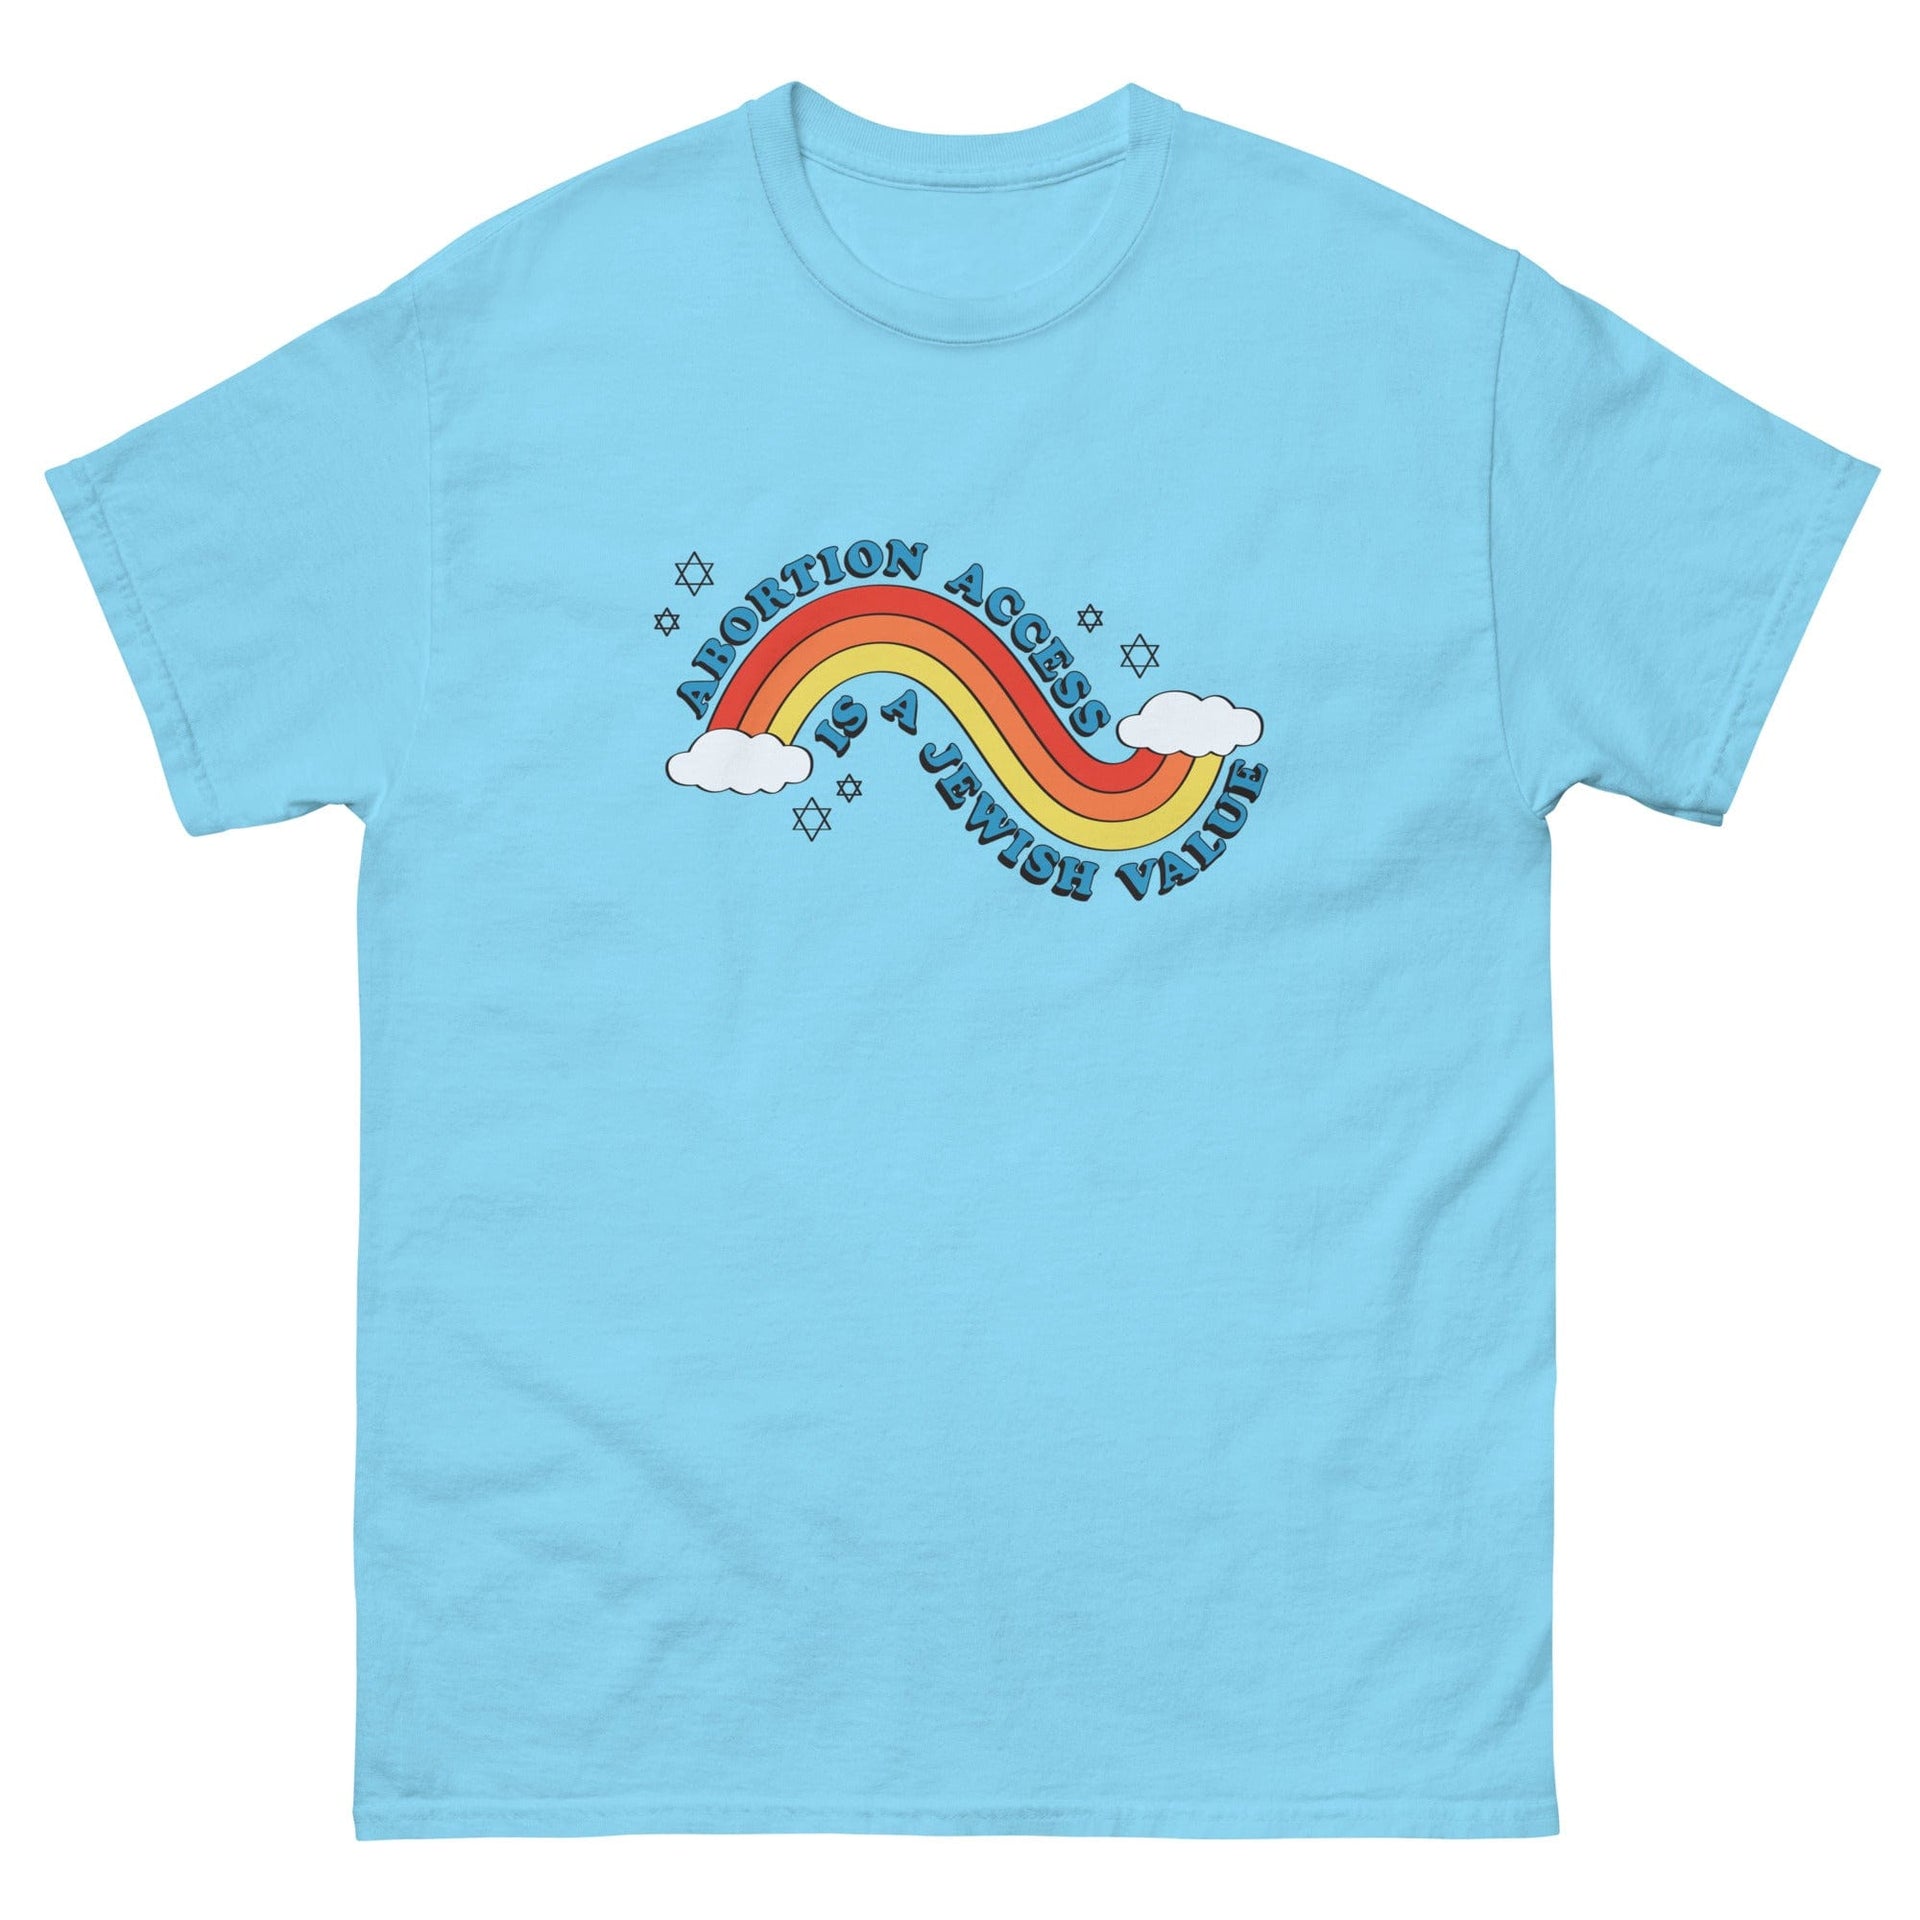 ModernTribe T-Shirts Sky Blue / S Abortion Access is a Jewish Value T-Shirt - $18 Per Shirt Goes to NNAF and NAF